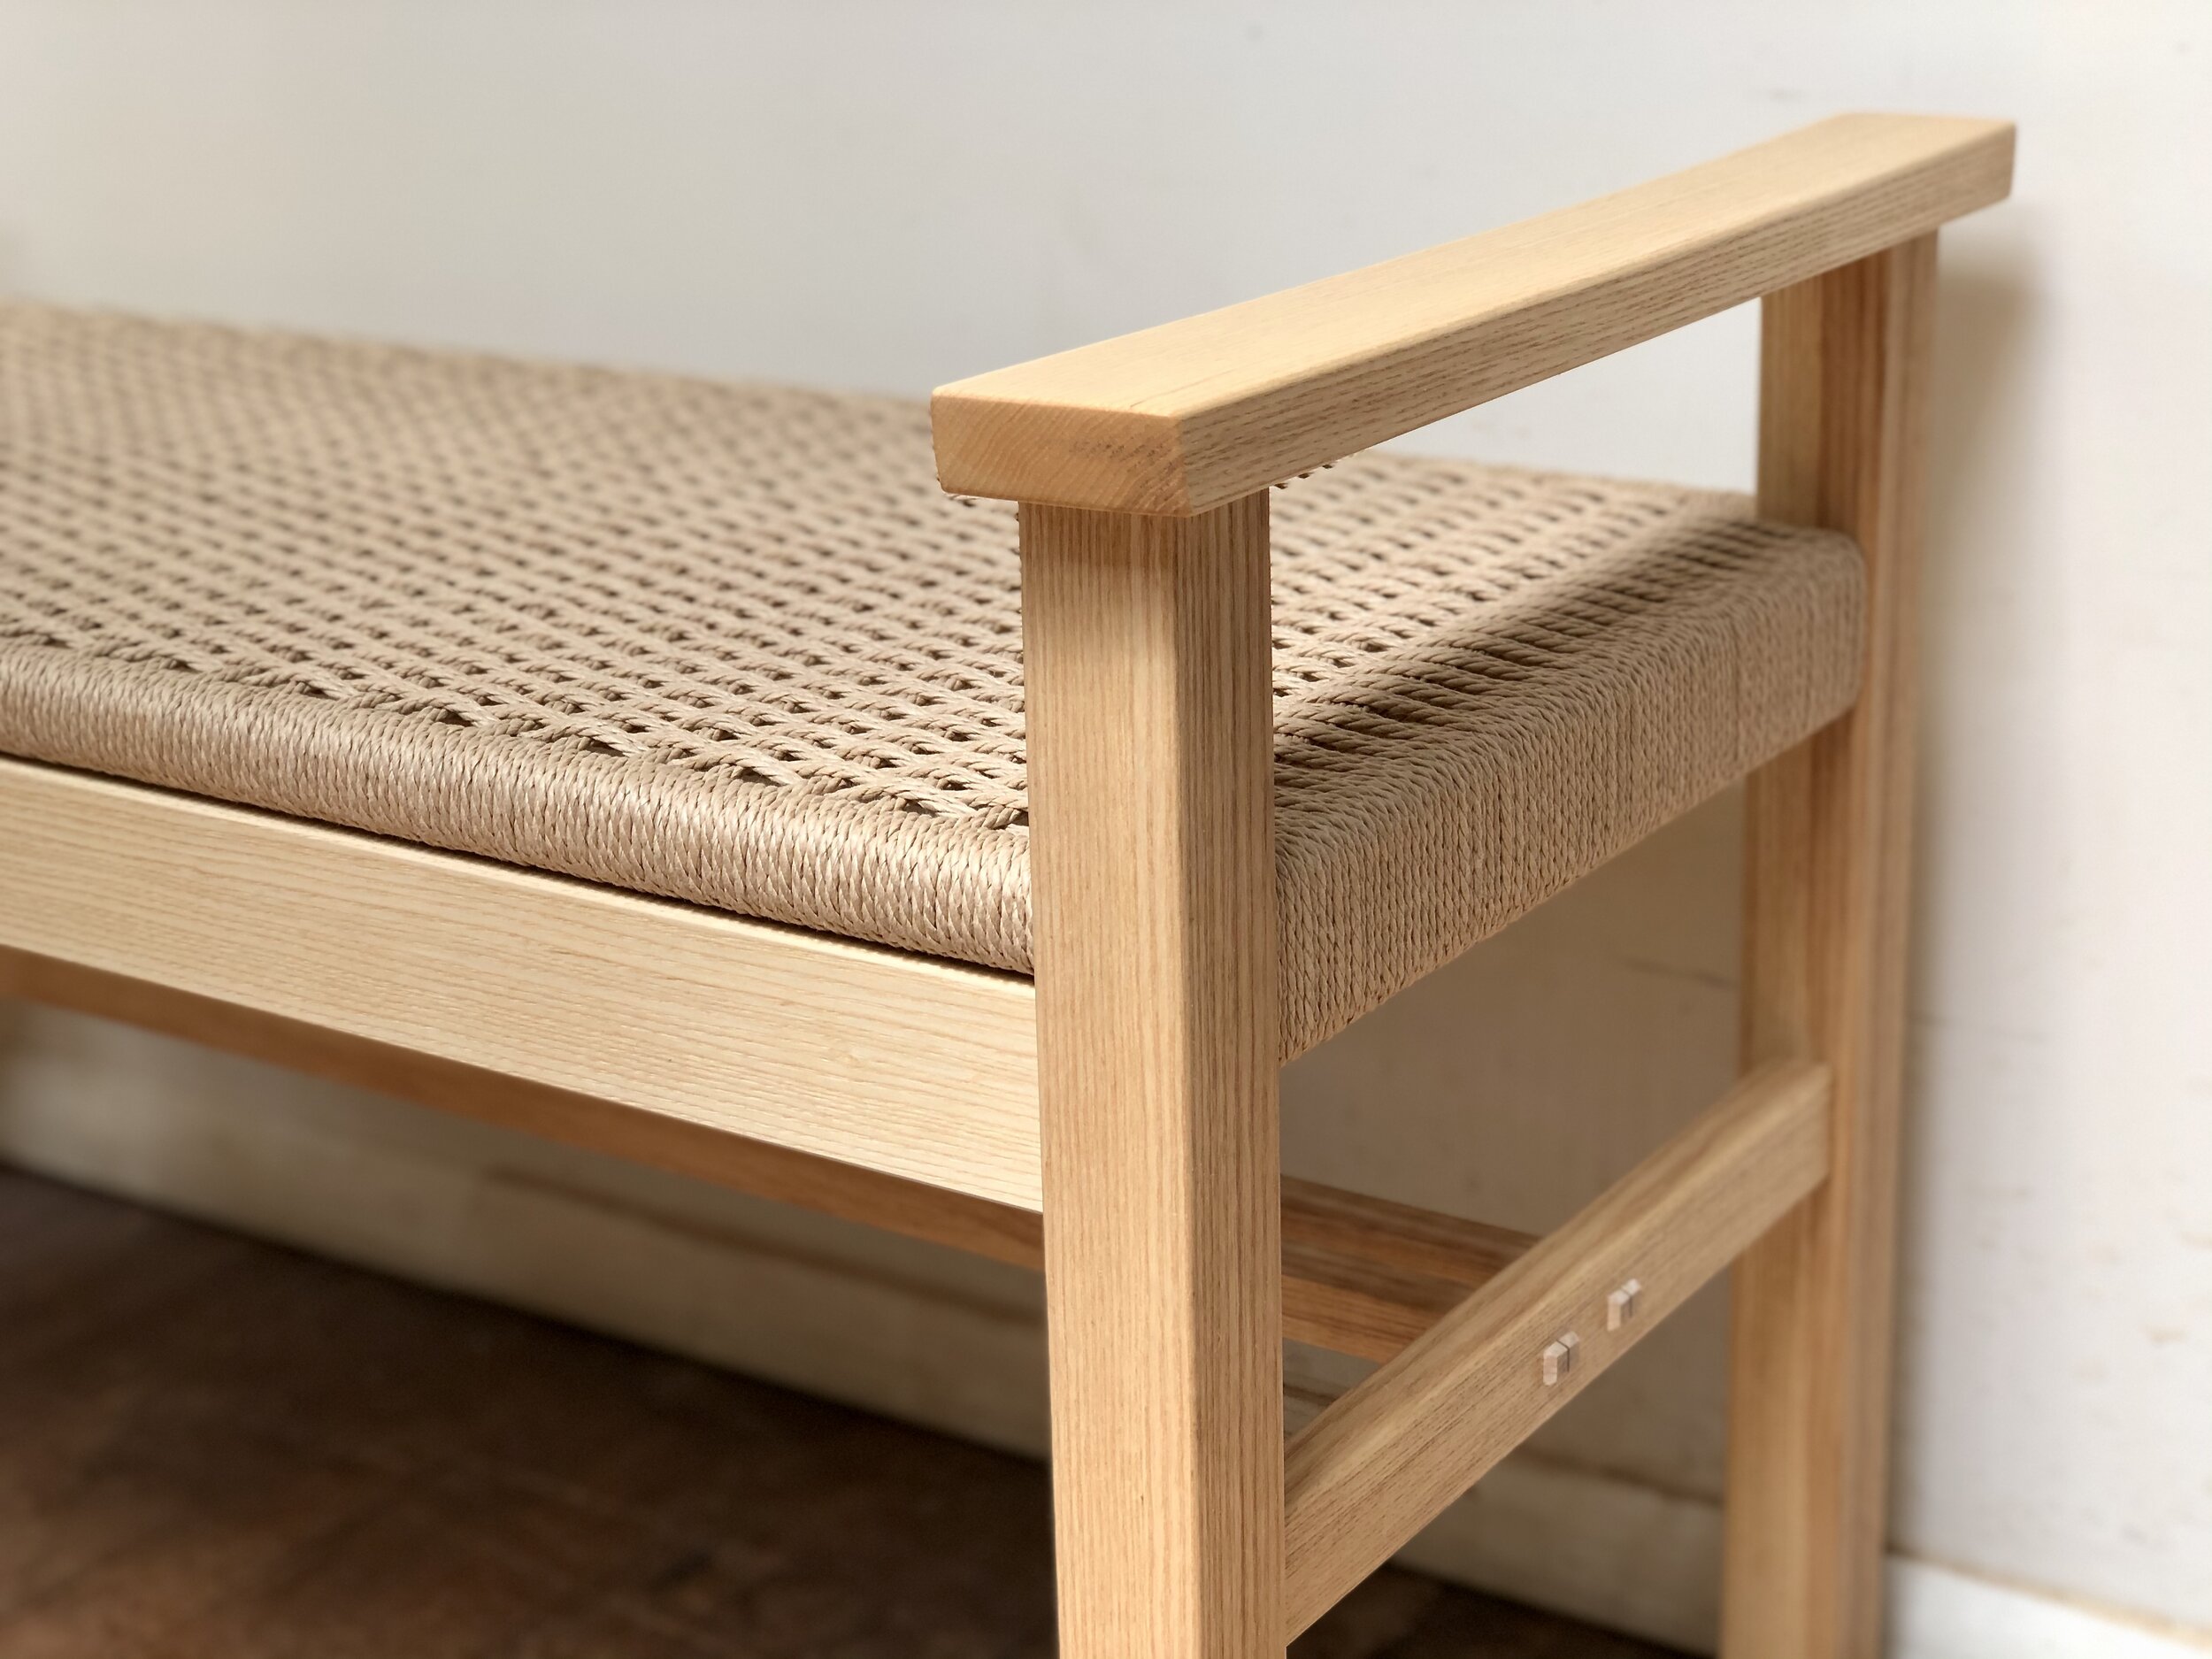 My project in Furniture Design: Introduction to Danish Cord Weaving course